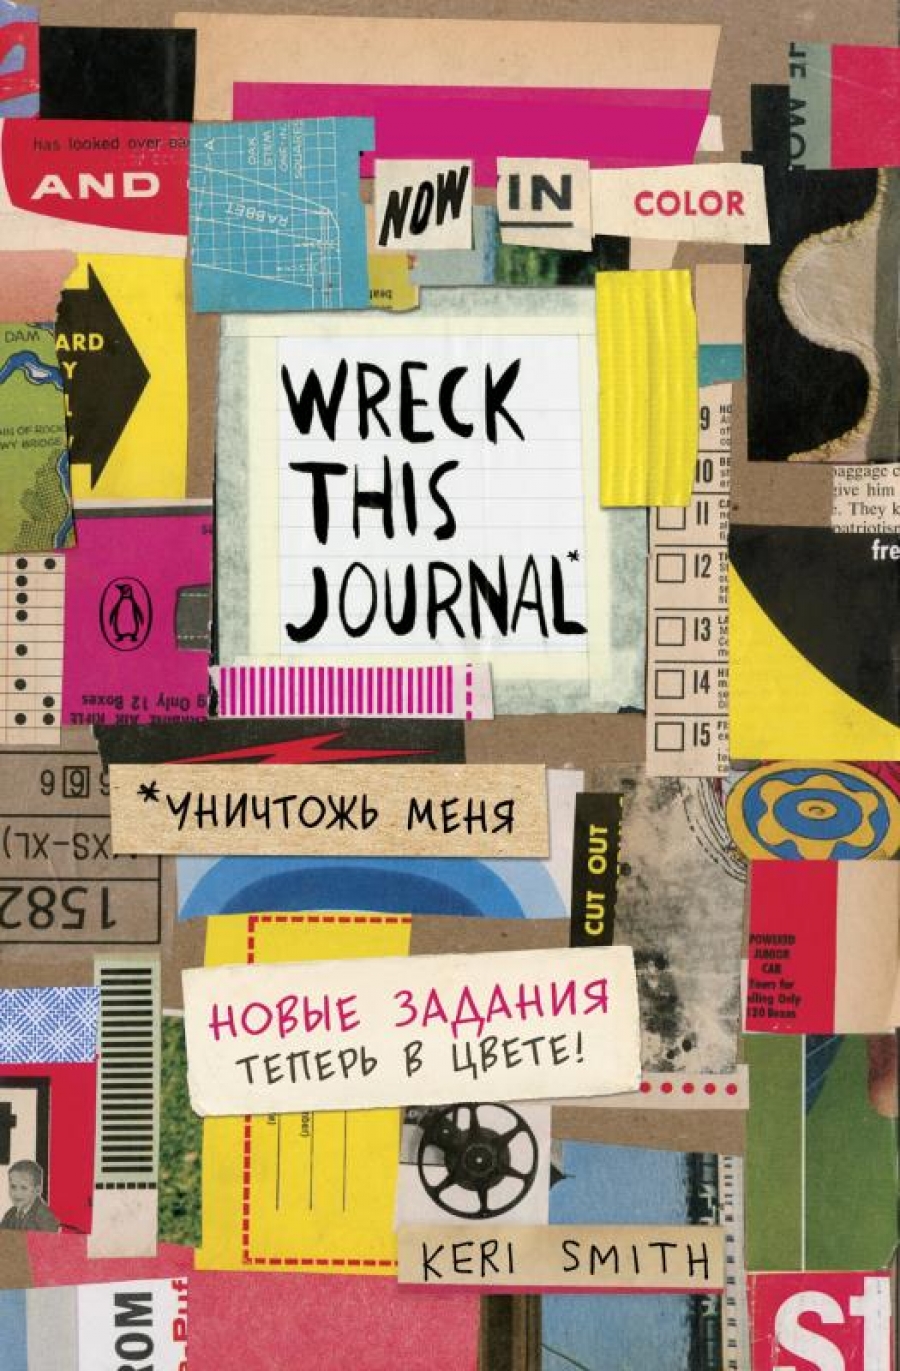  .   .     (.. Wreck this journal) 